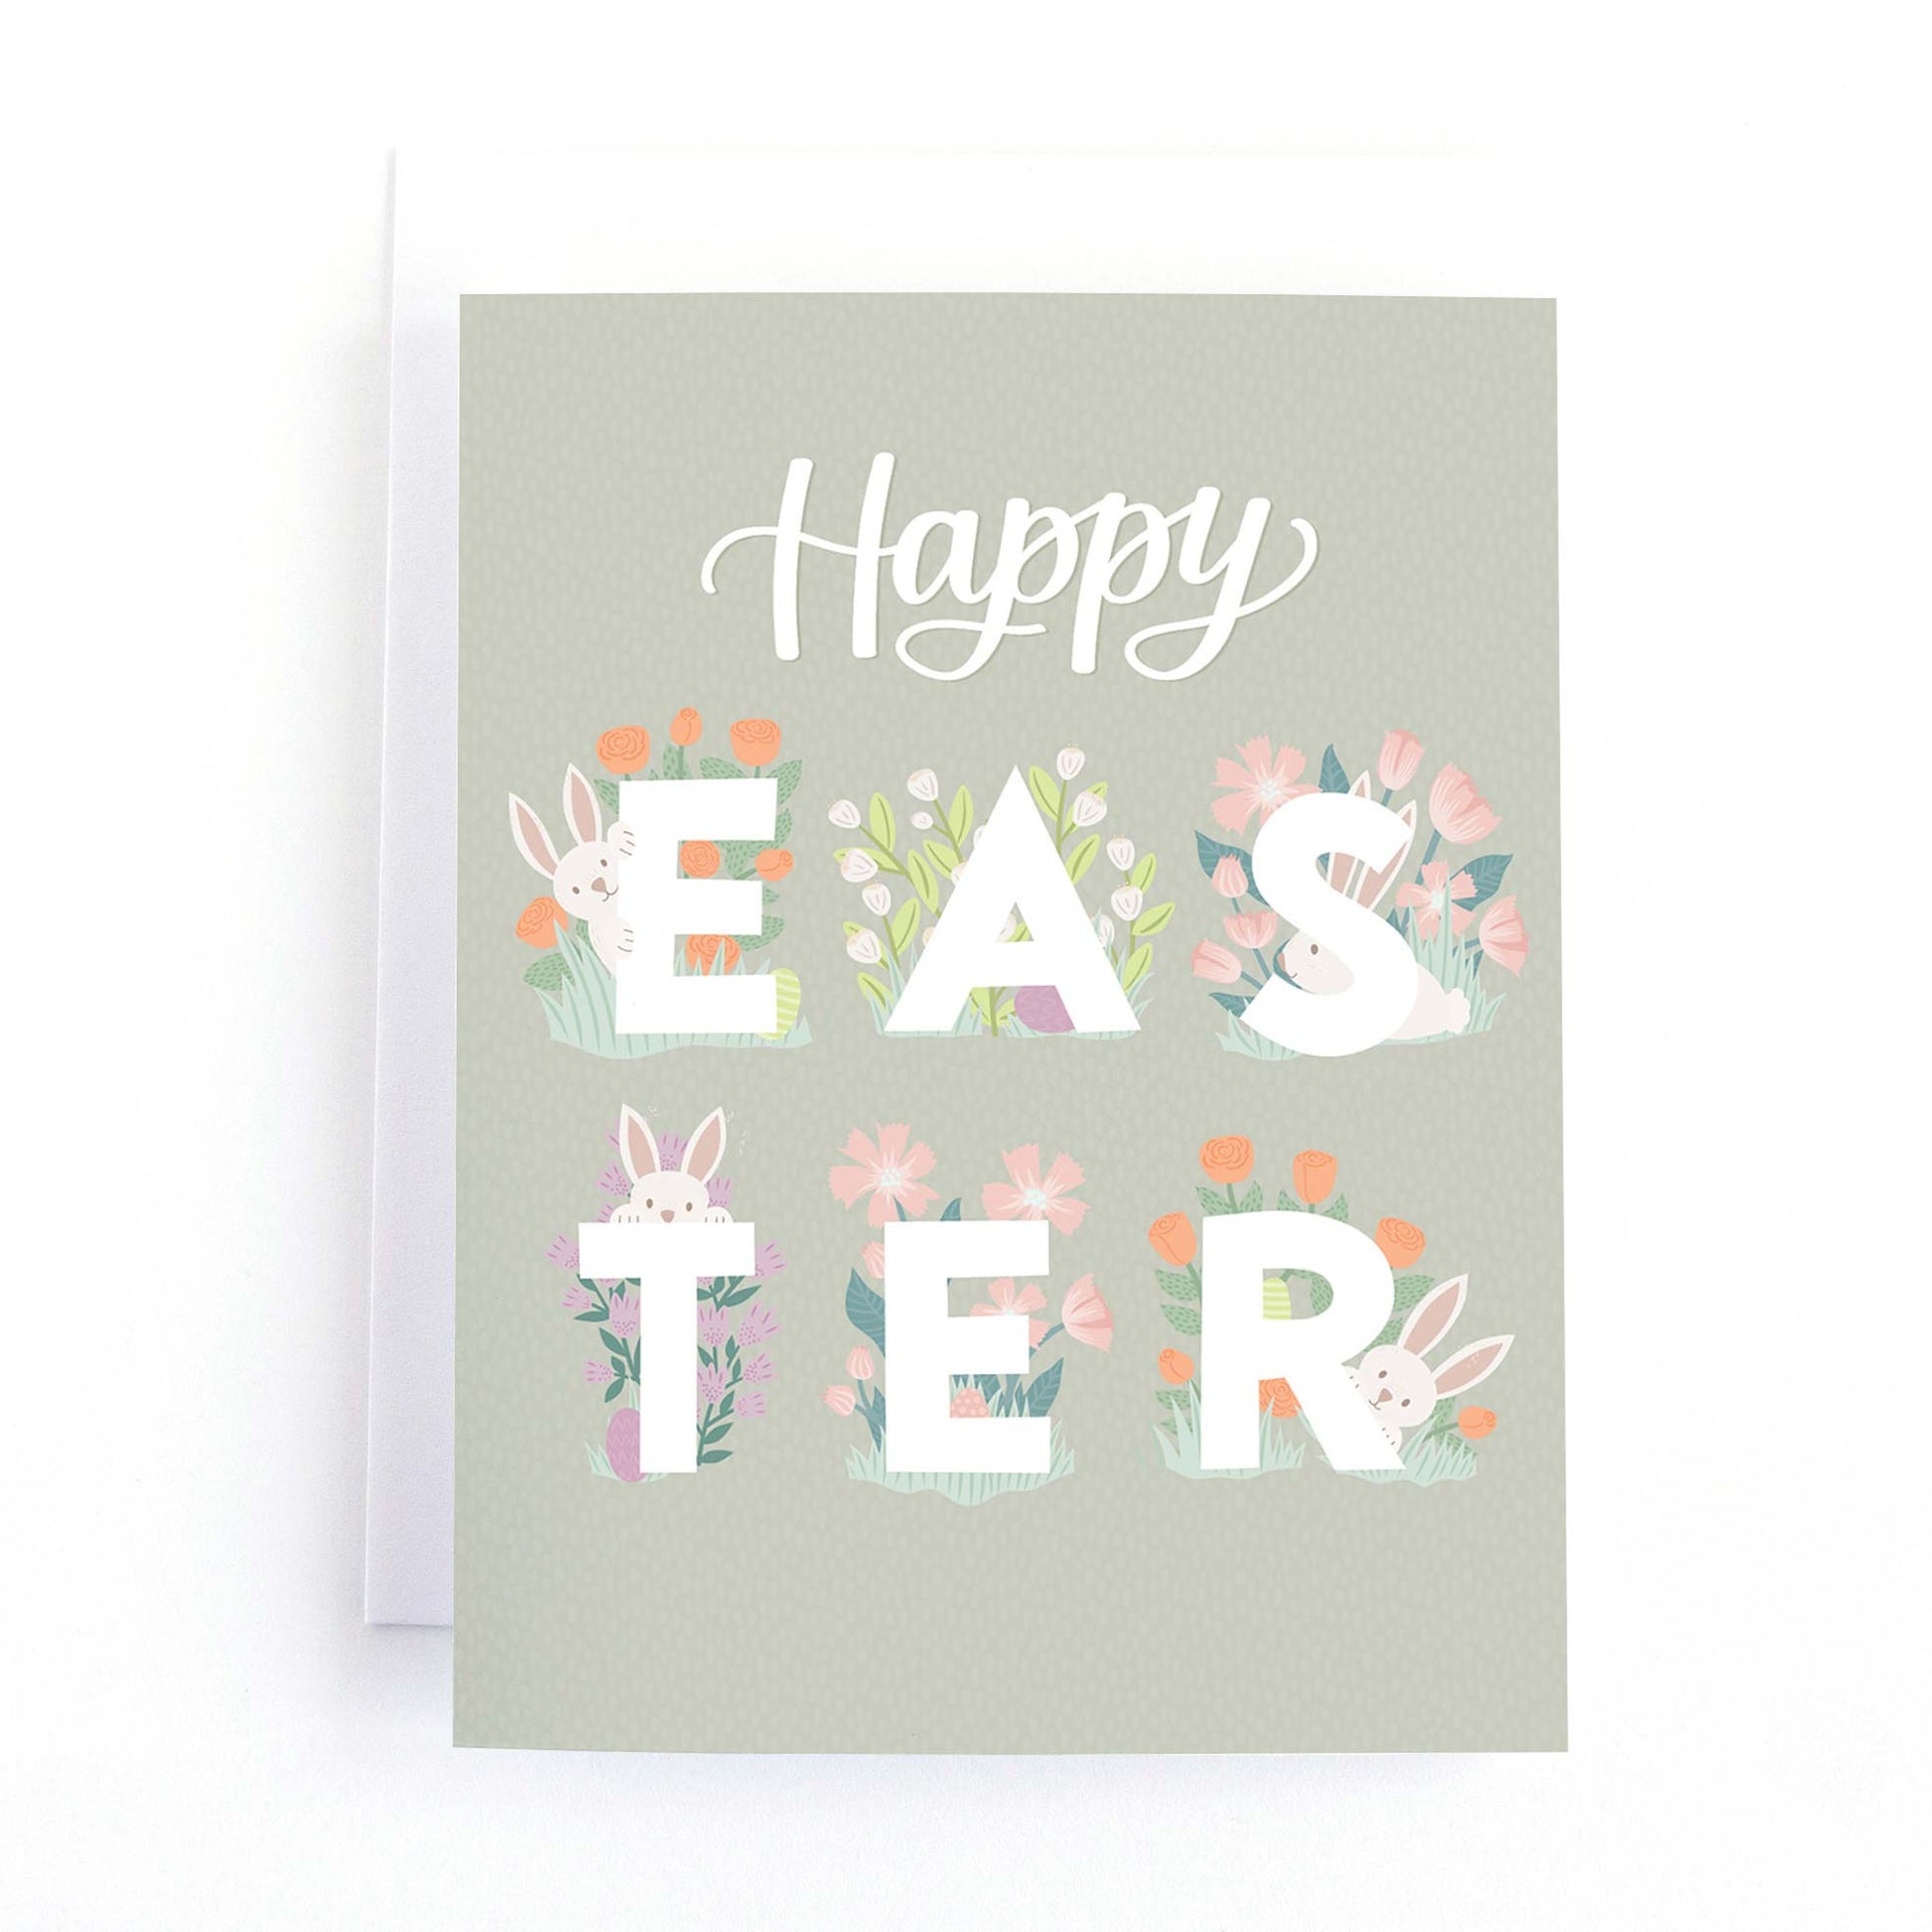 Eater card with cute easter bunnies playing hide and seek in the flowers surrounding the text, Happy Easter.